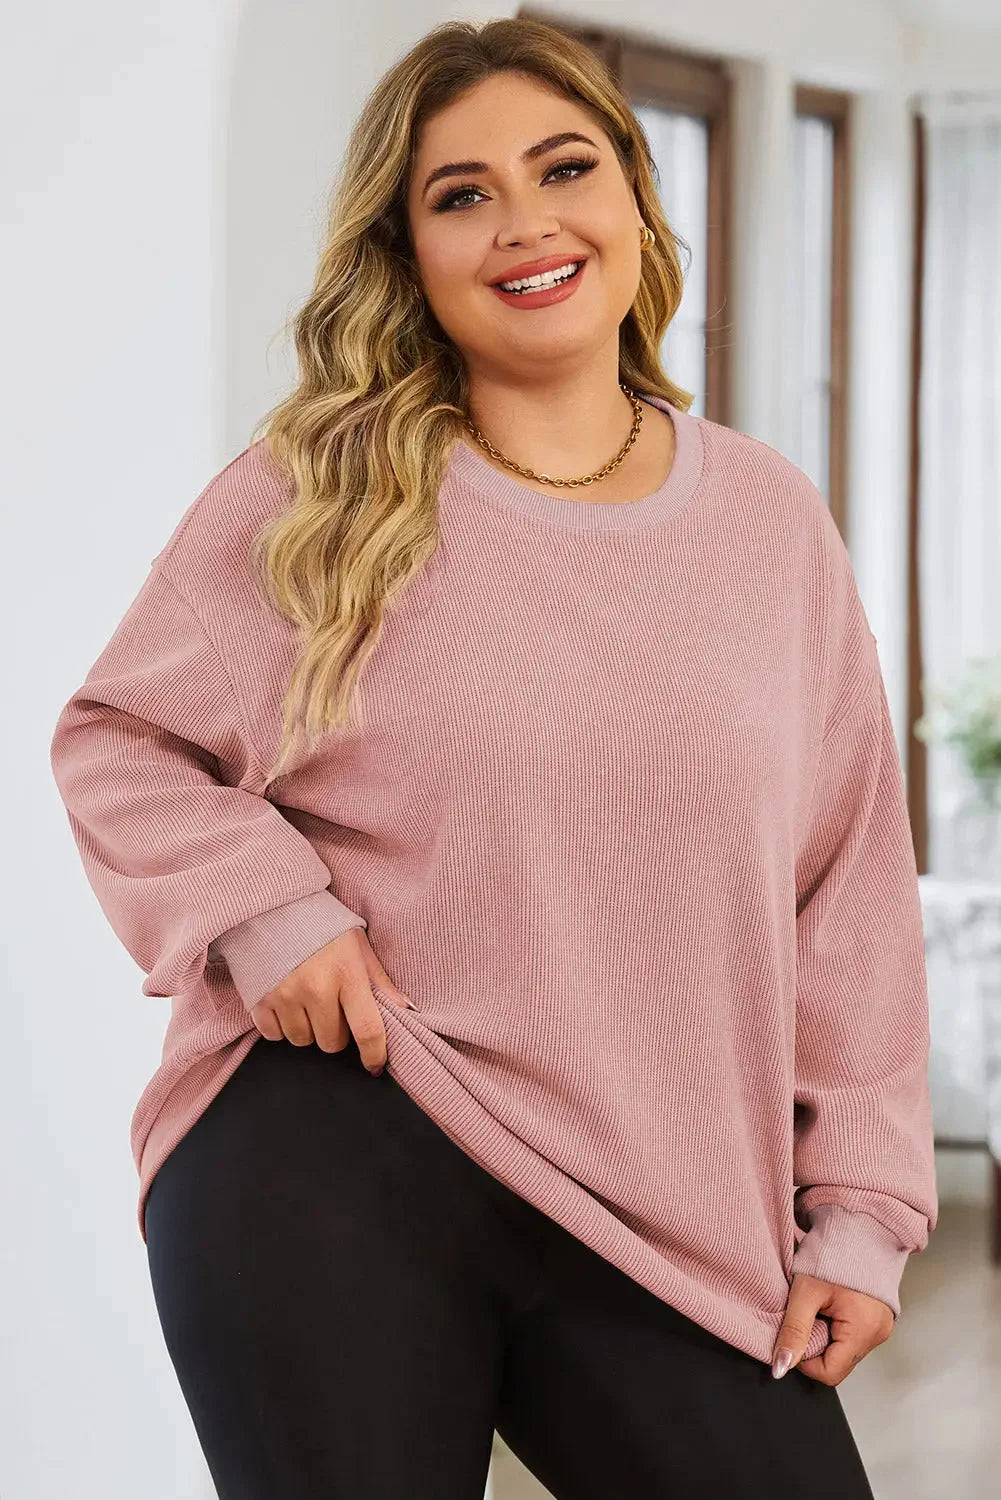 Pink solid ribbed knit round neck pullover sweatshirt - 1x / 100% polyester - tops